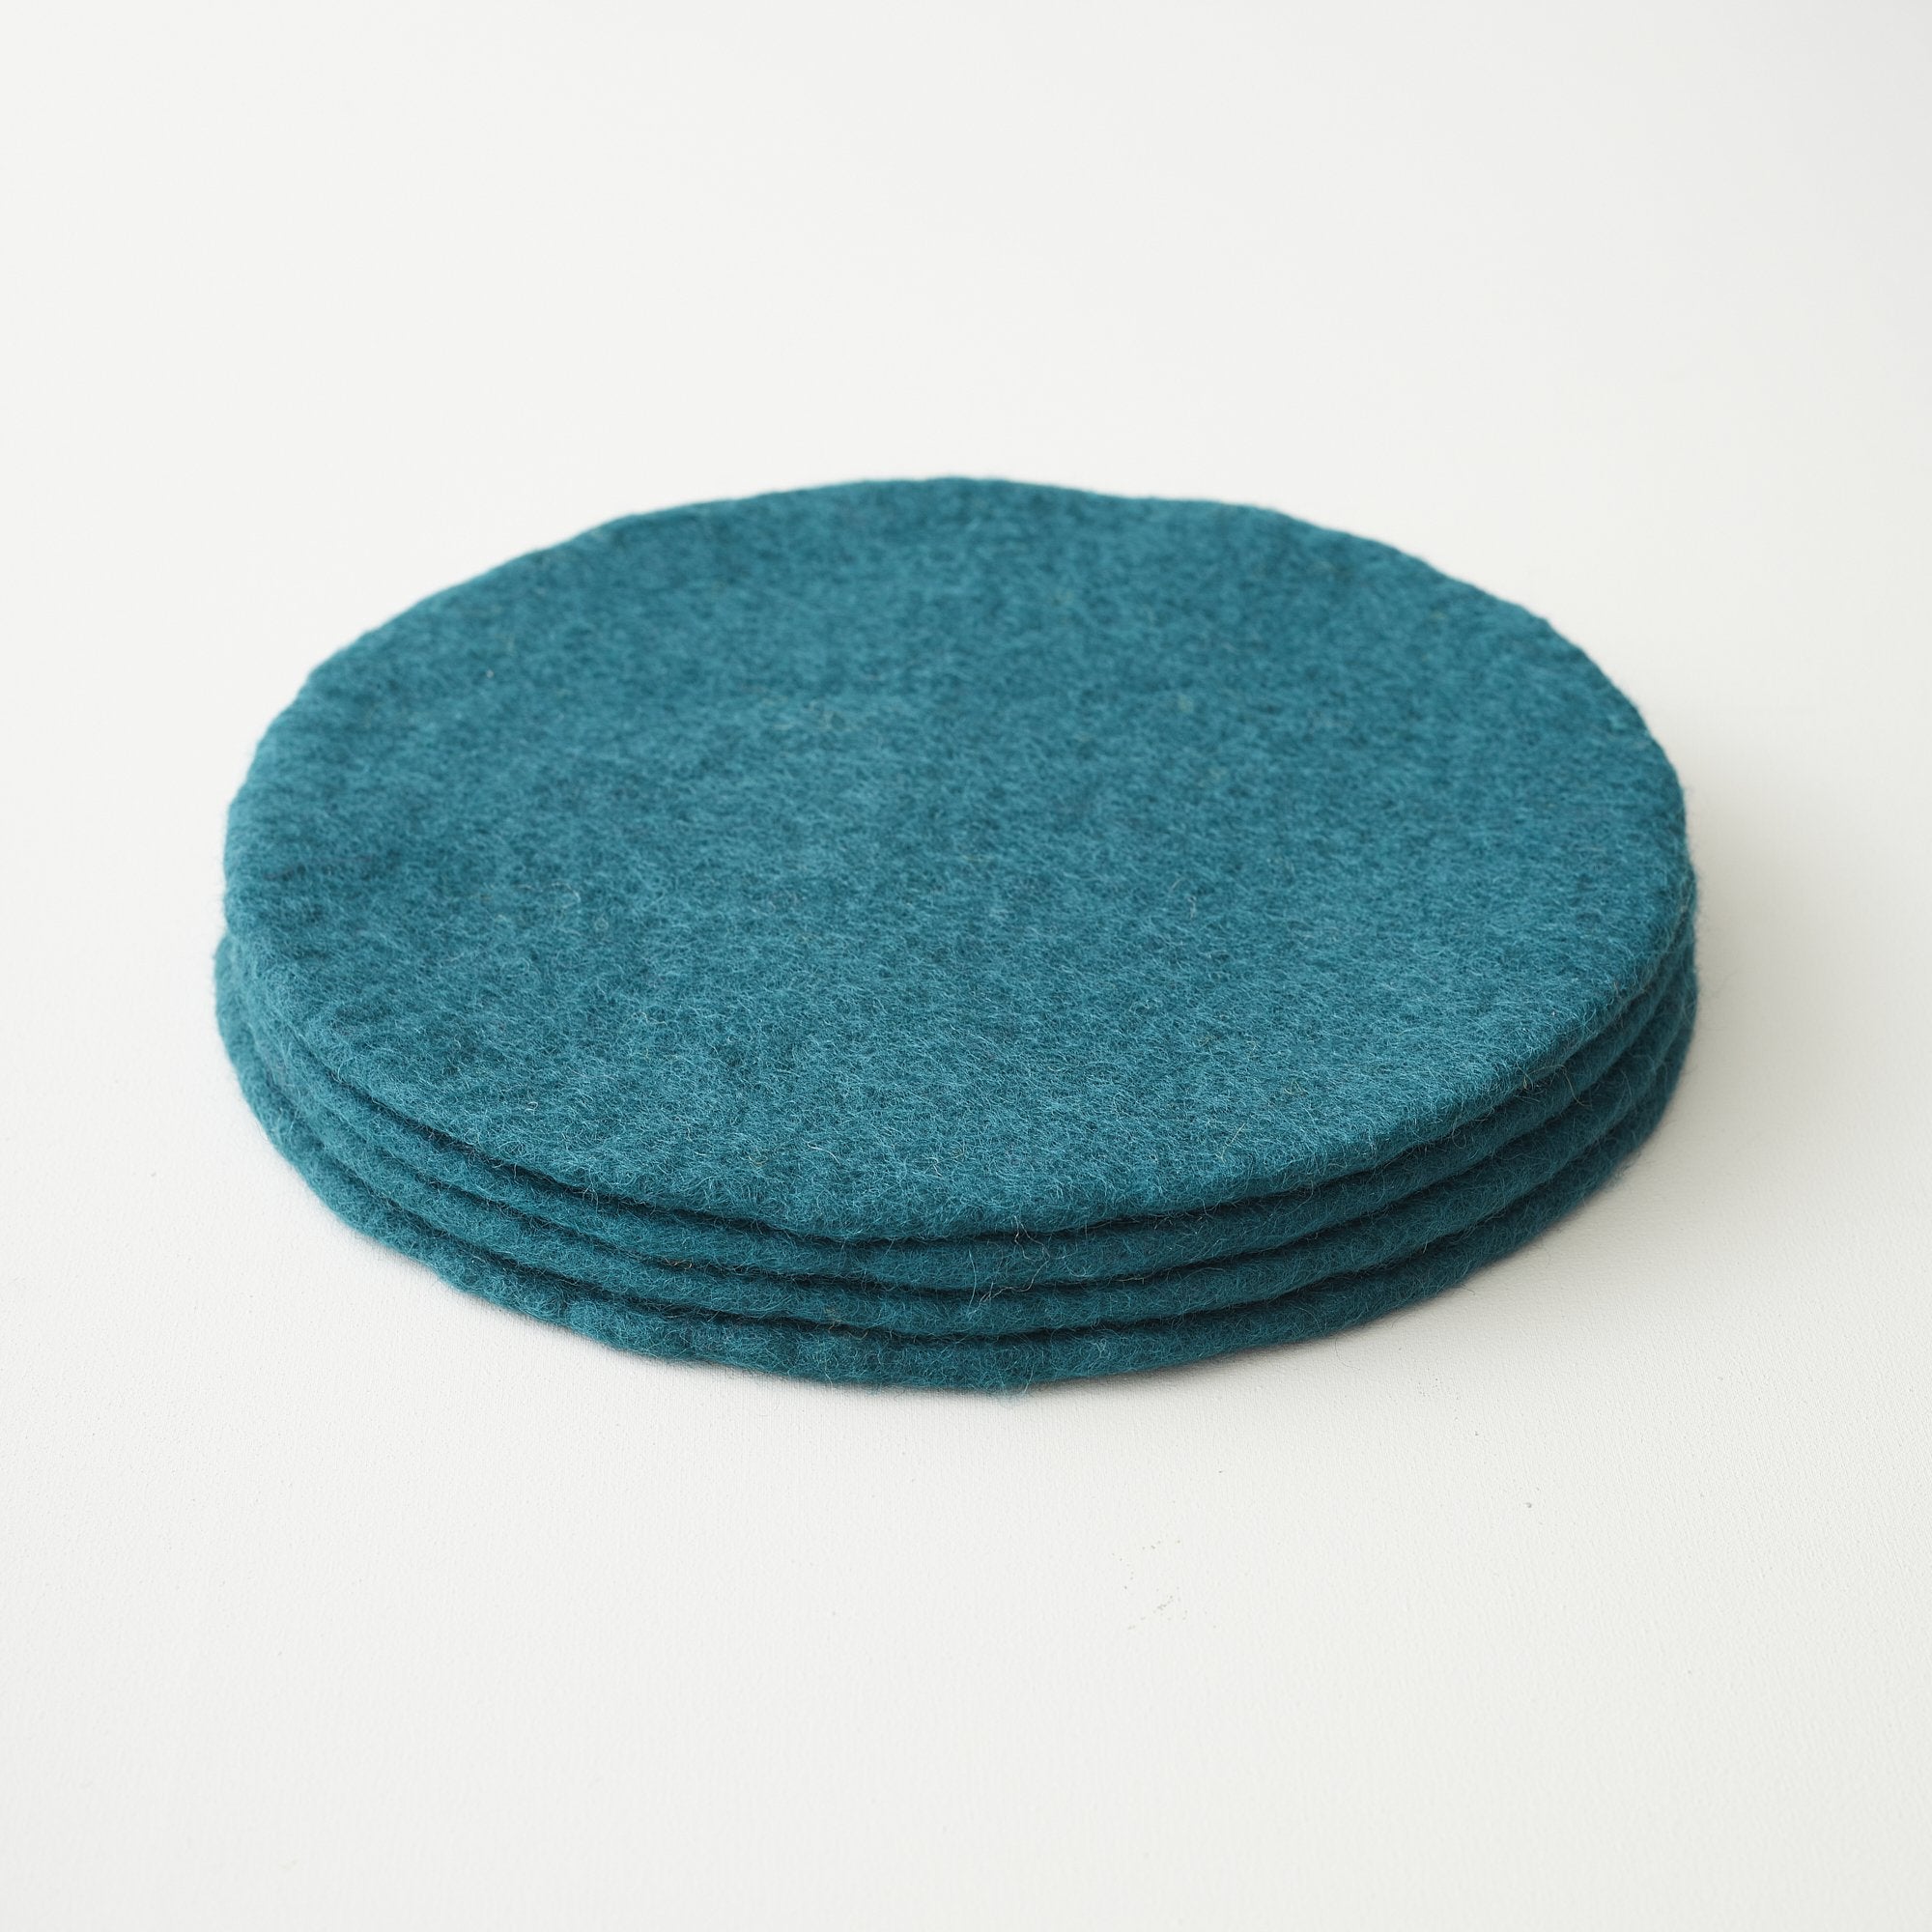 Set of 4 Teal Felted Place Mats